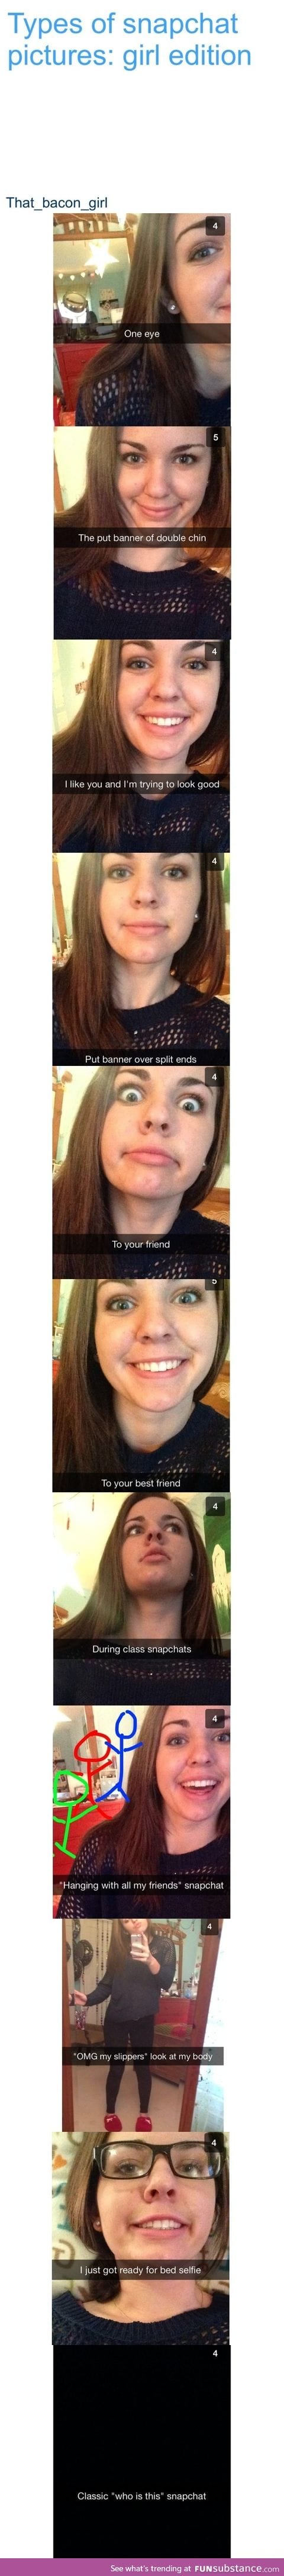 Different types of snapchats